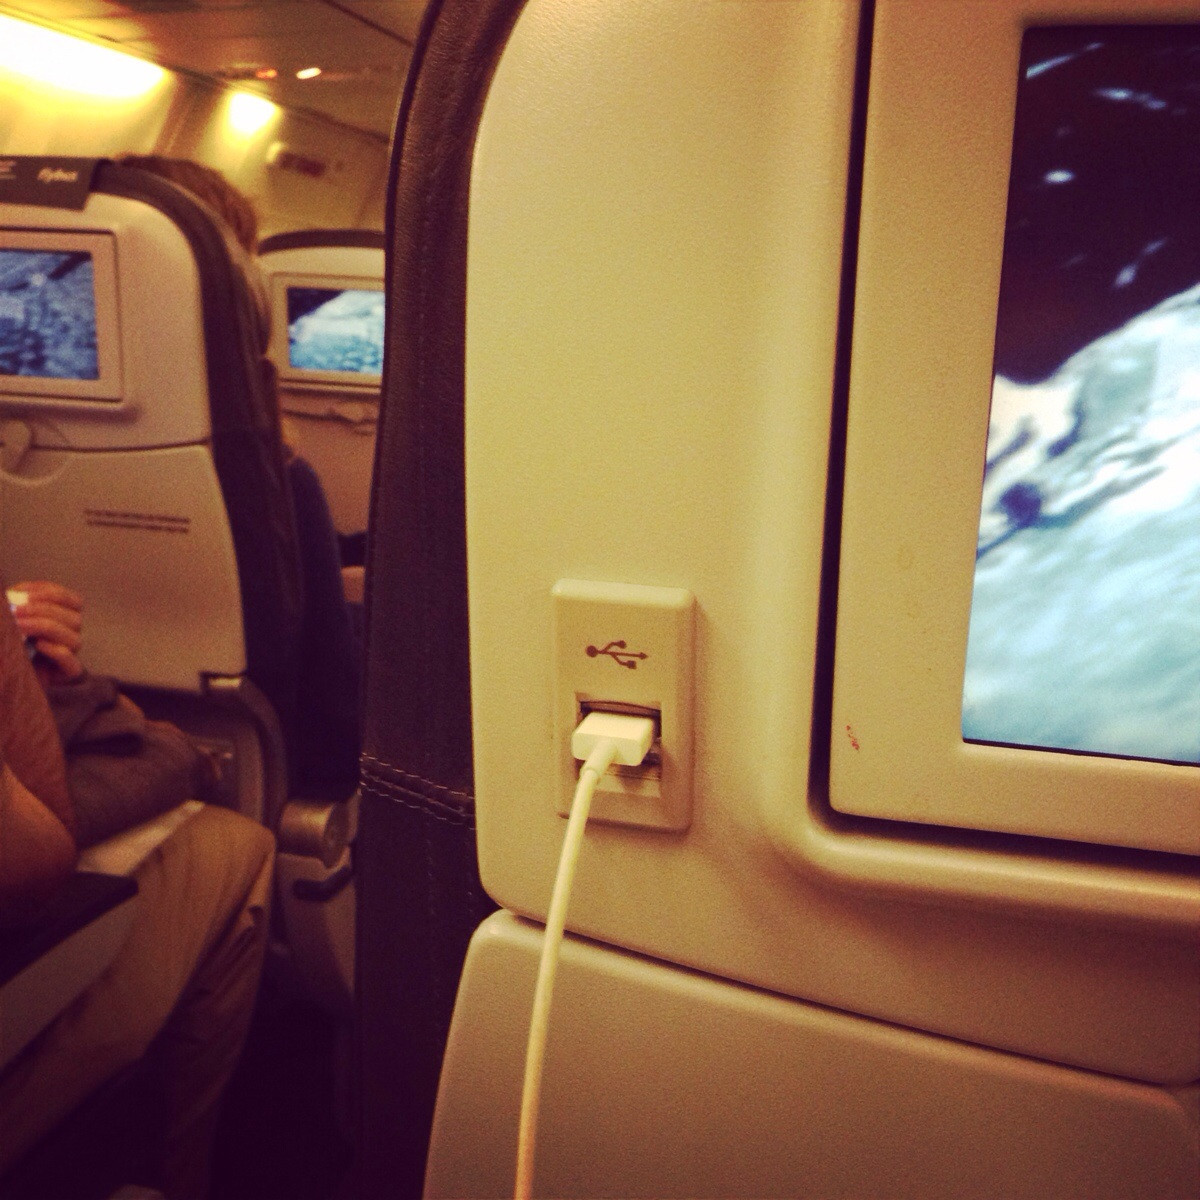 aer lingus power outlet